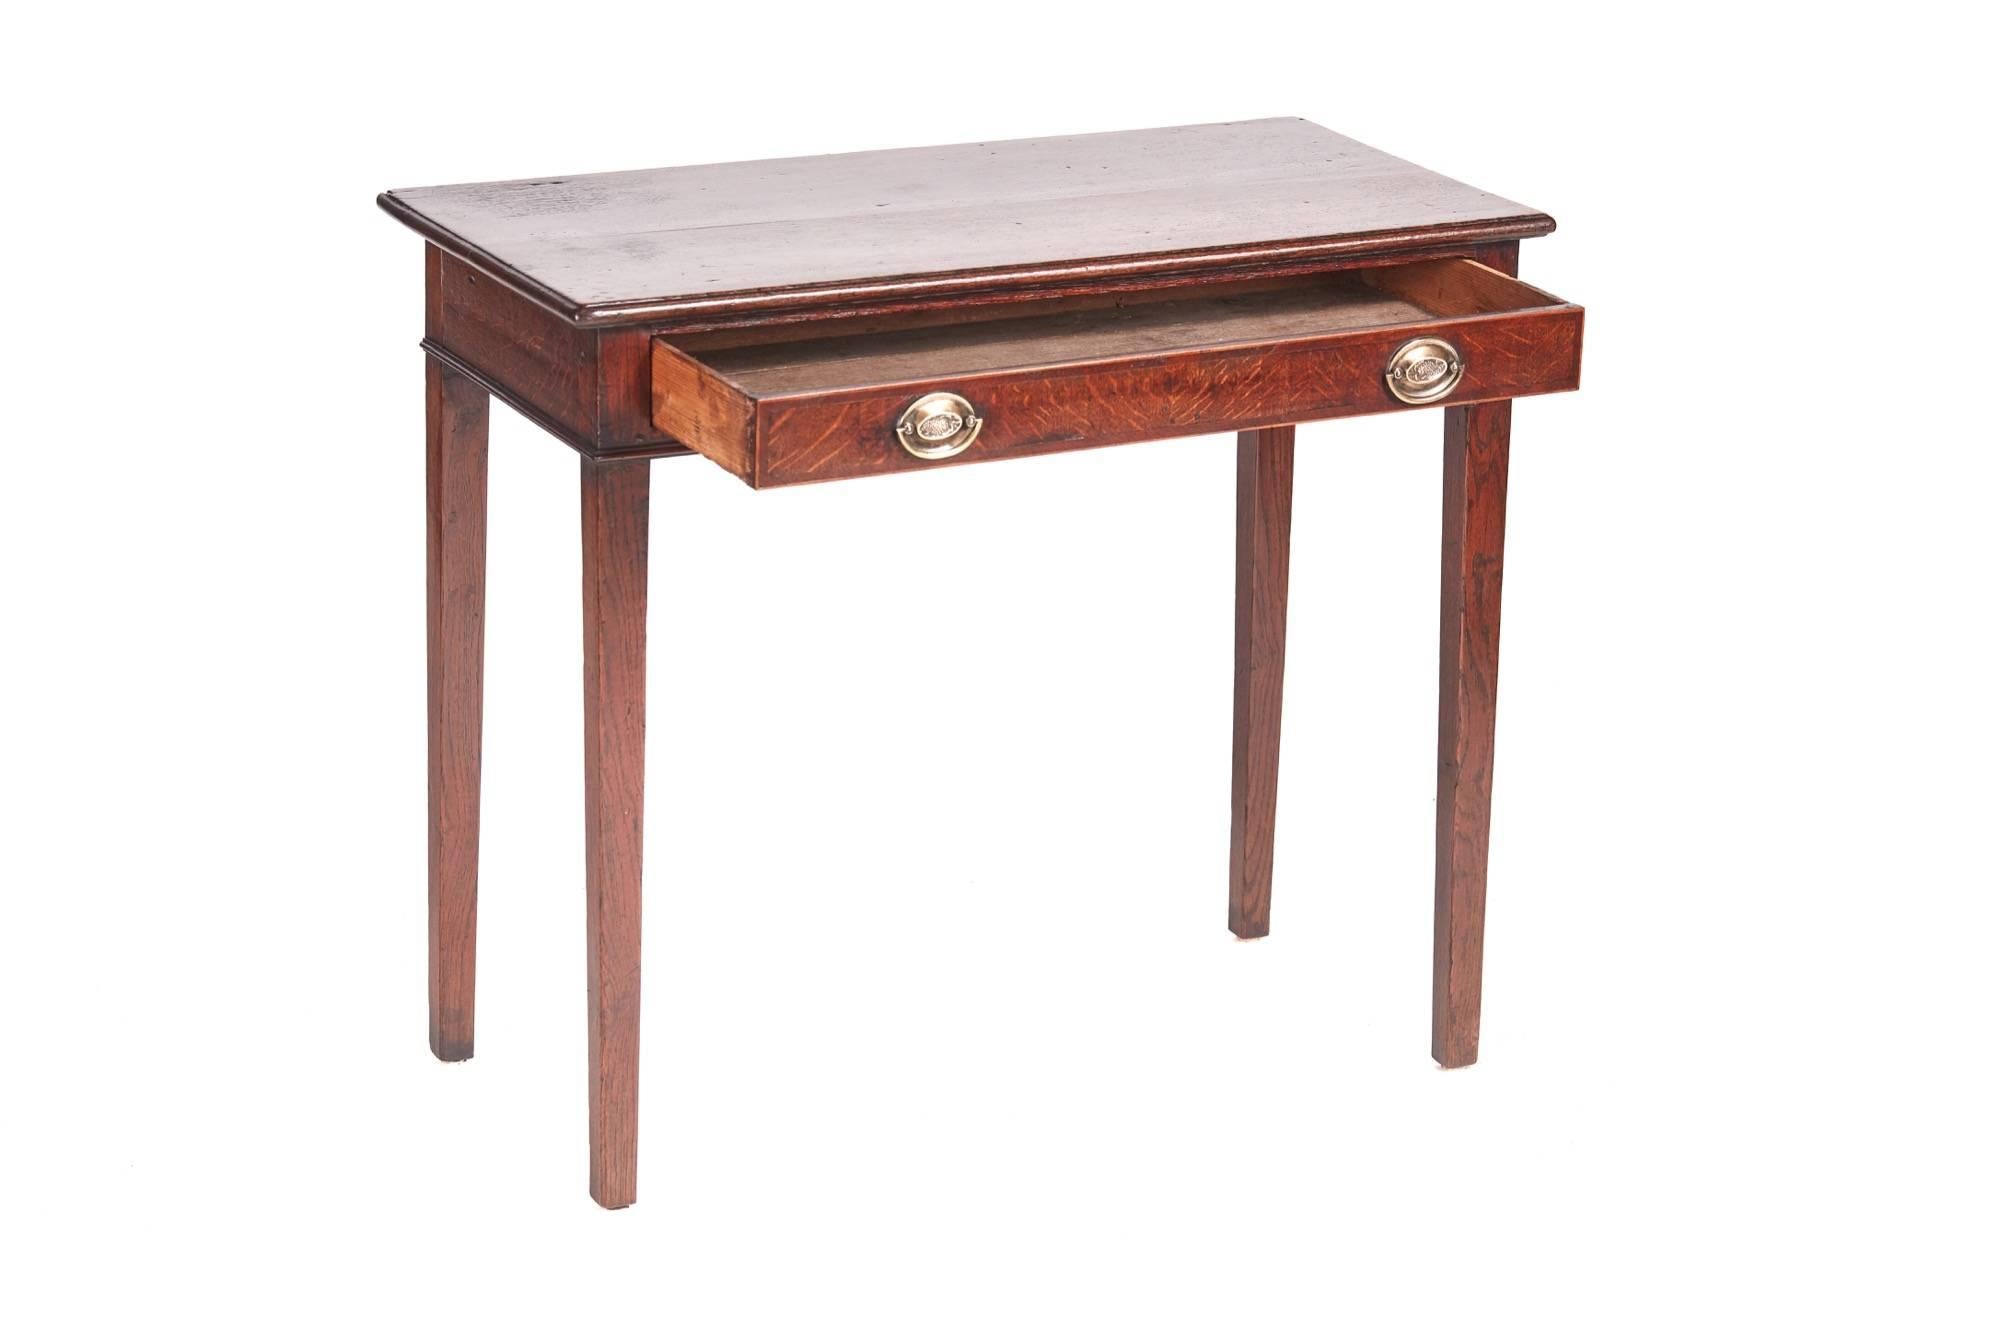 George III oak side / lamp table, with a lovely oak top, one long drawer to the frieze crossbanded in walnut, standing on four square tapering legs, lovely color.